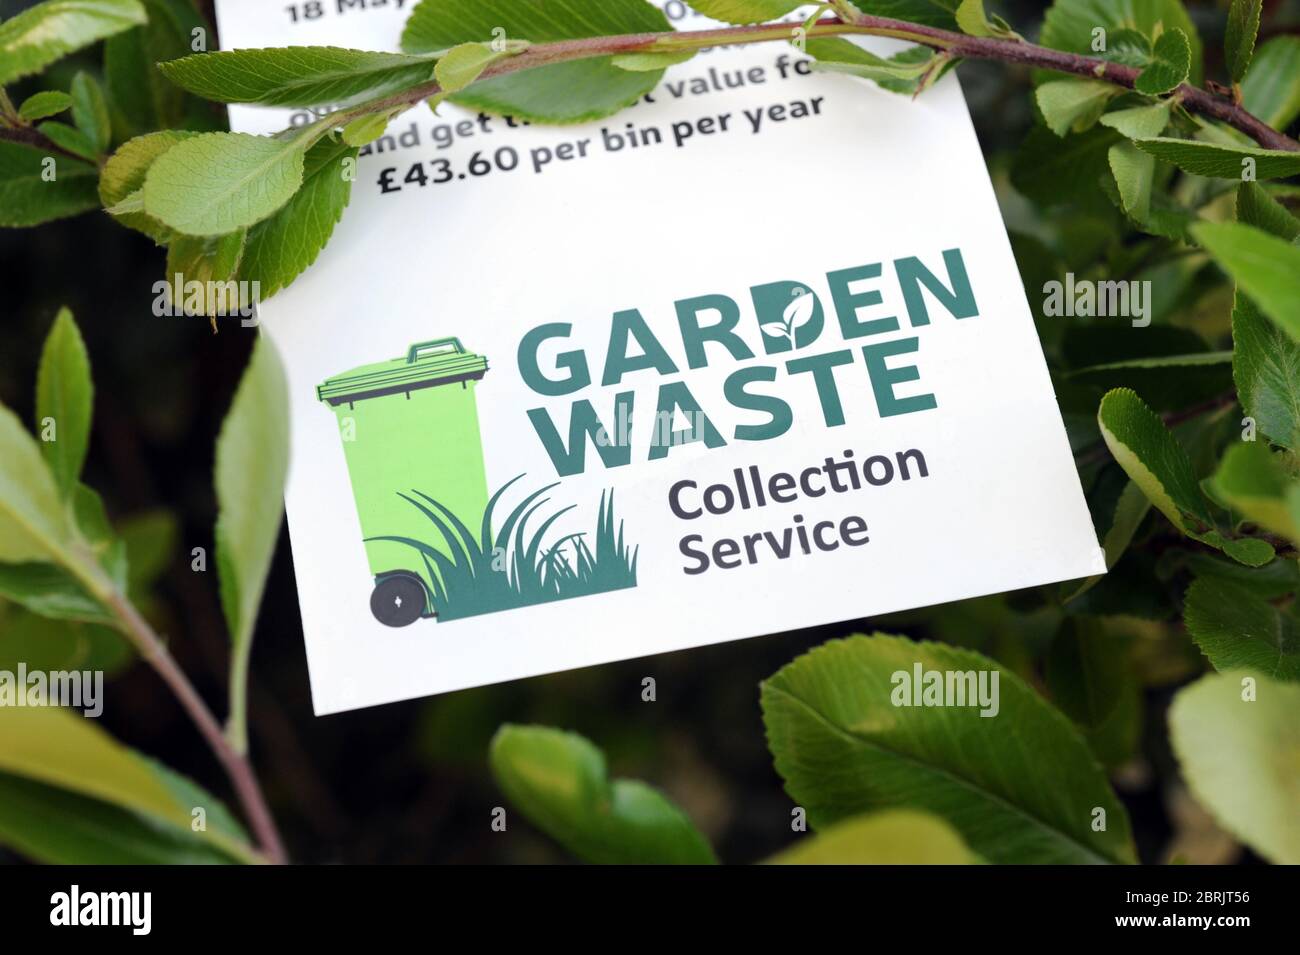 LOCAL COUNCIL GARDEN WASTE LEAFLET CONCERNING DOMESTIC GARDEN WASTE COLLECTION CHARGES RE COUNCIL TAX GARDENING GARDENERS COST PAYMENT ETC  UK Stock Photo